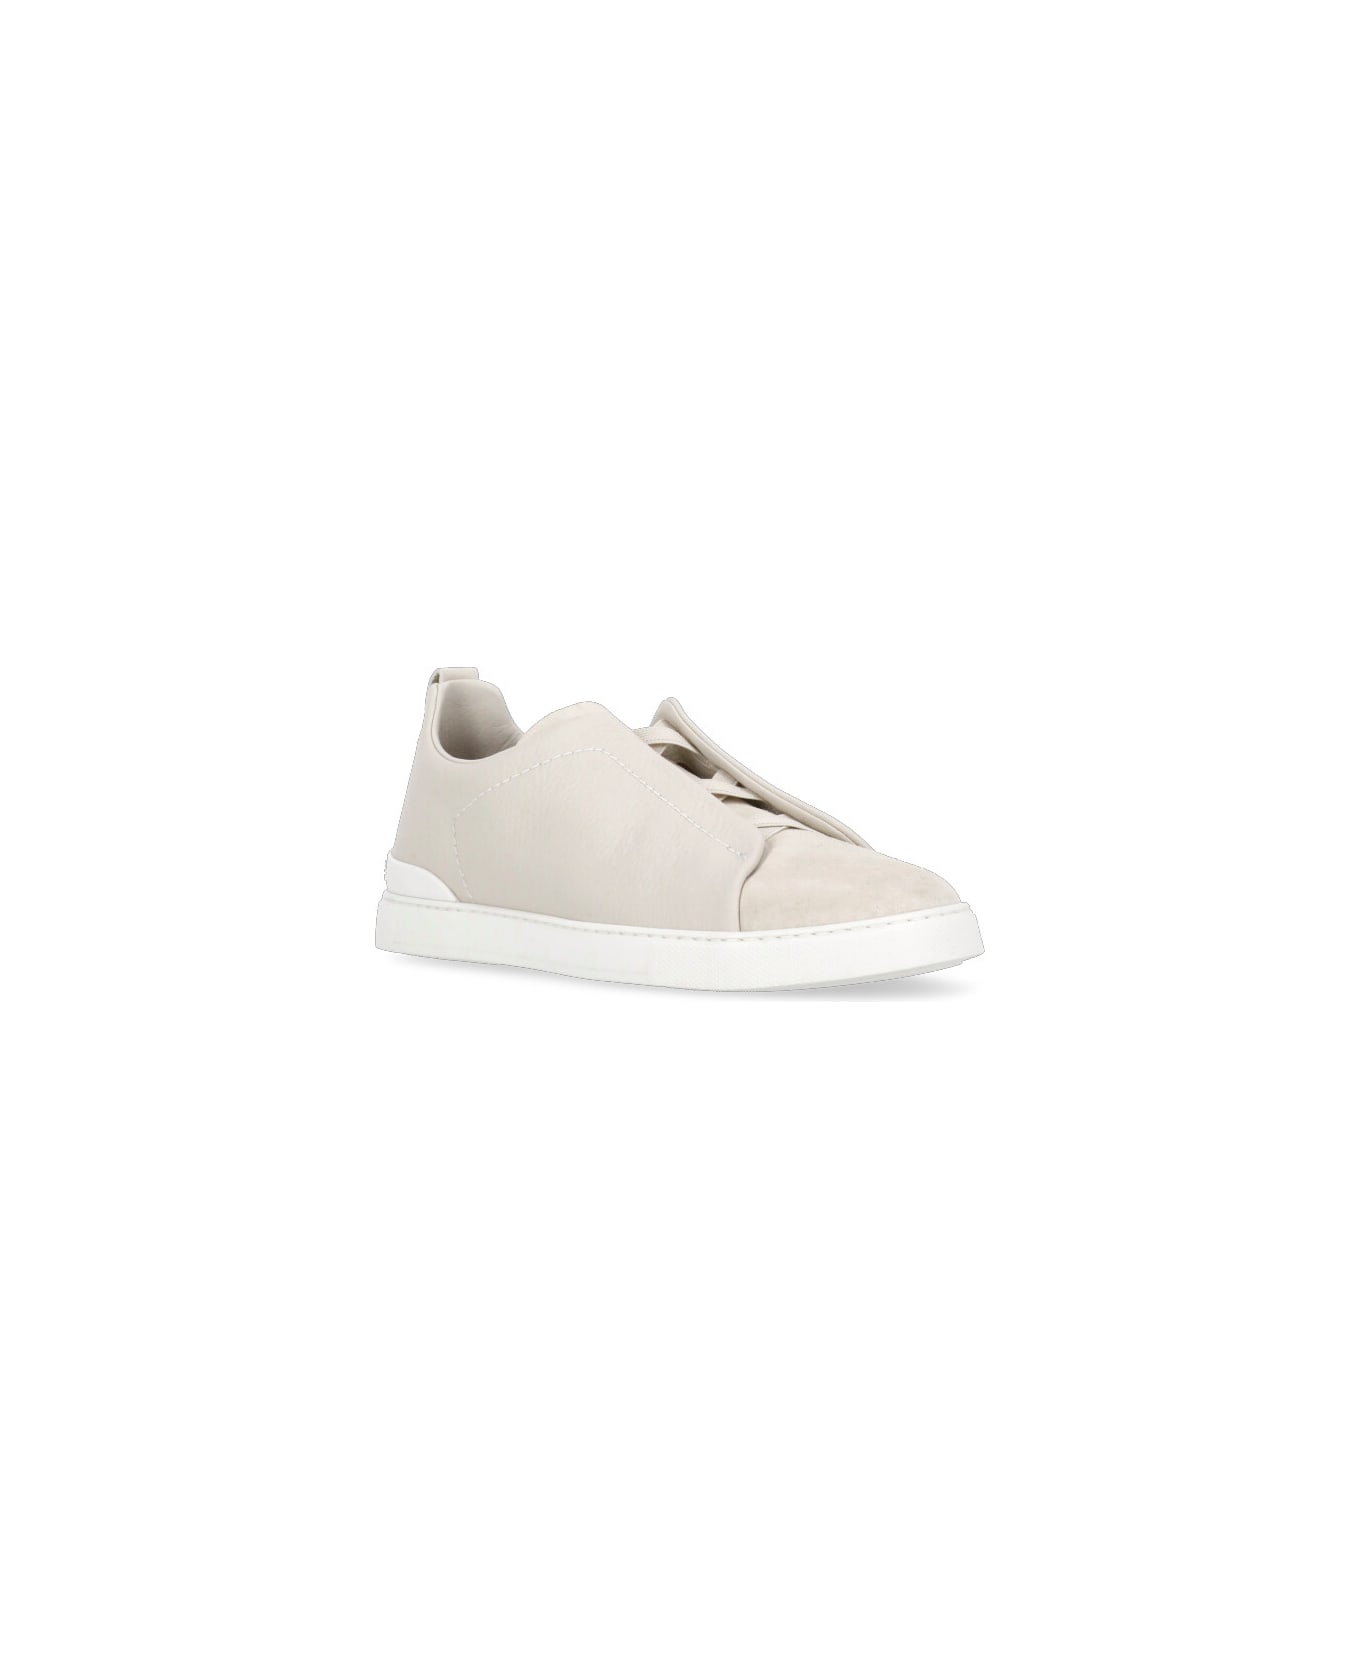 Zegna Triple Stitch Sneakers - Ivory スニーカー